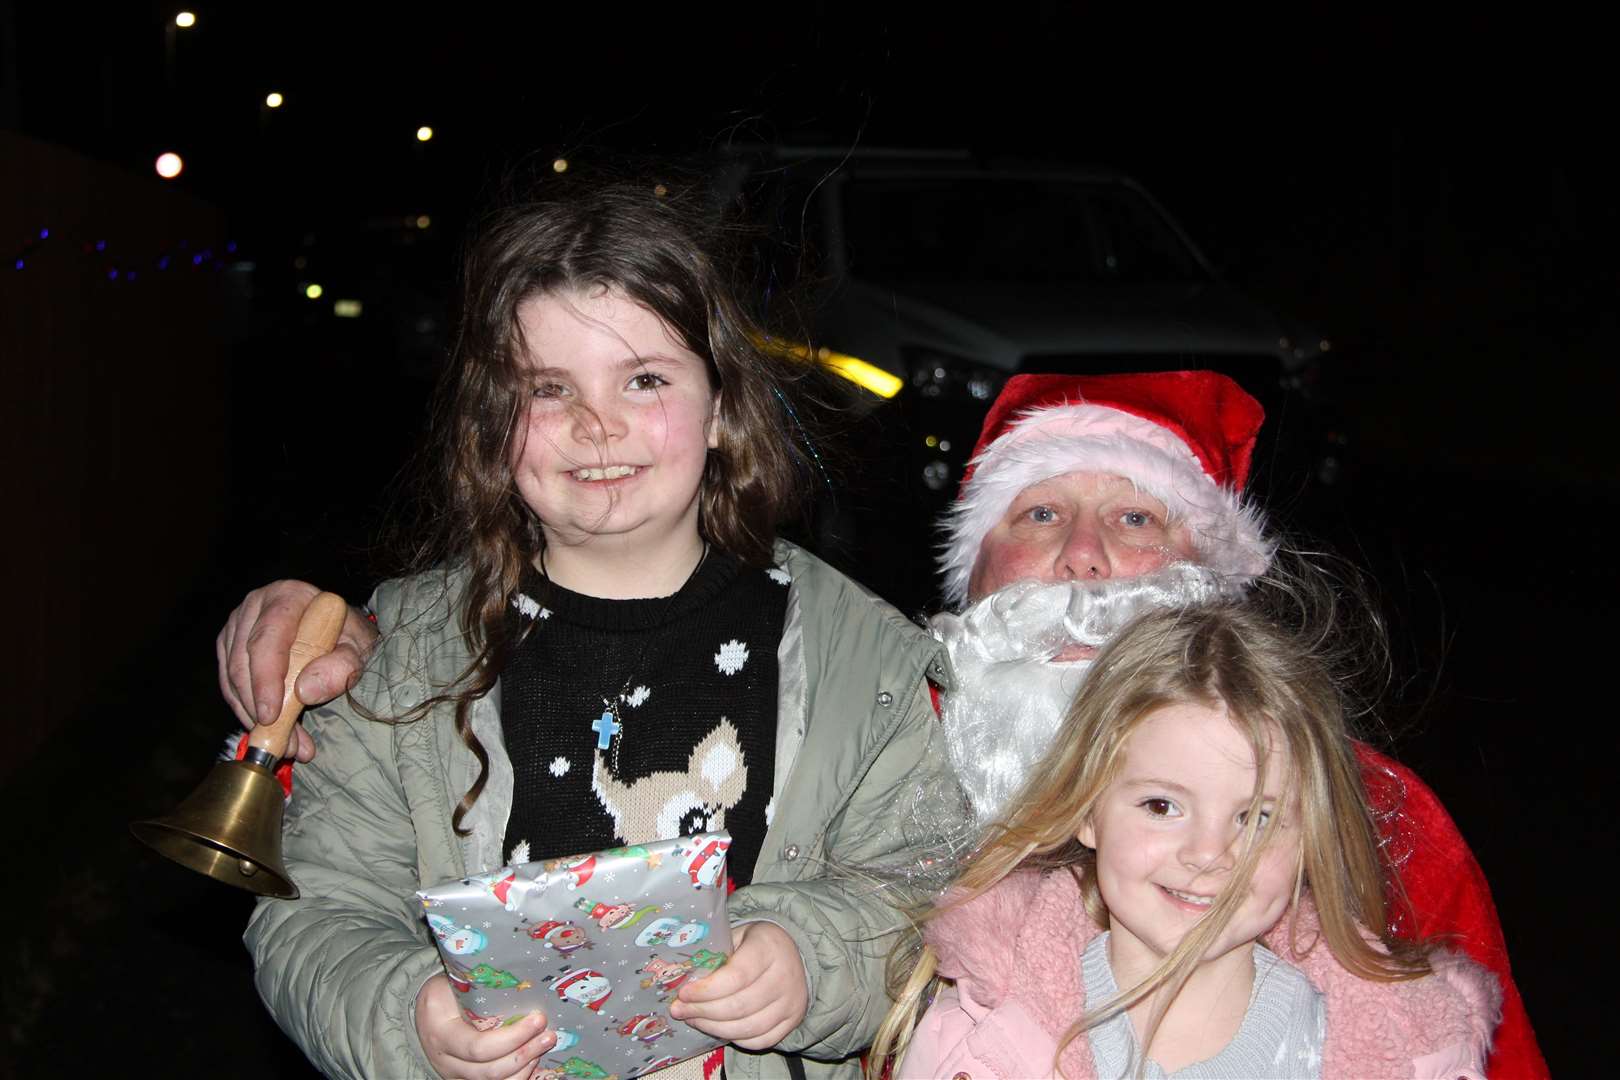 Big smiles from Massie and Jesy Custerson as Santa arrives bearing gifts.